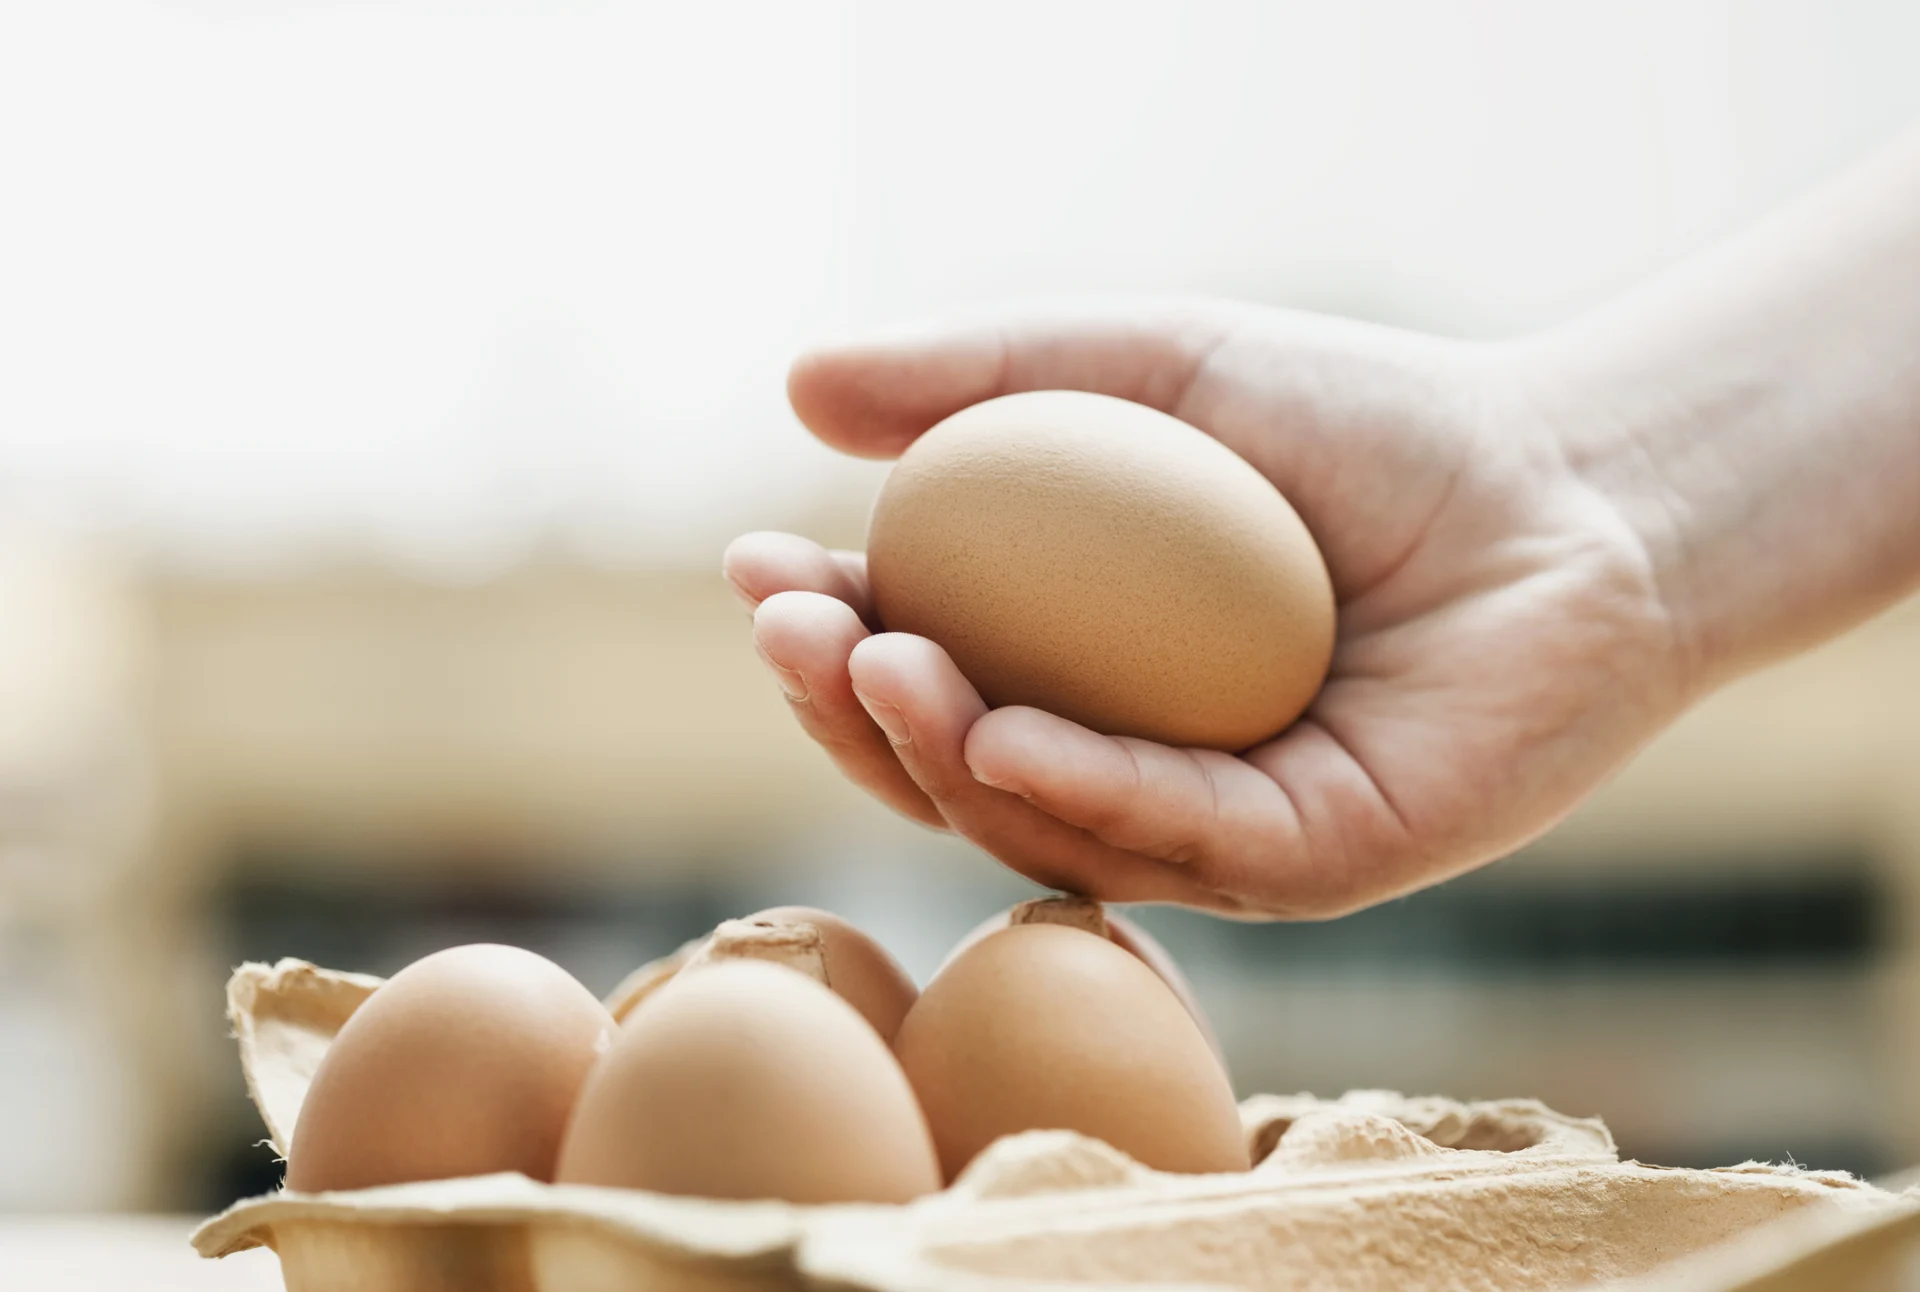 A hand gently cups a brown egg, above a box of other eggs.